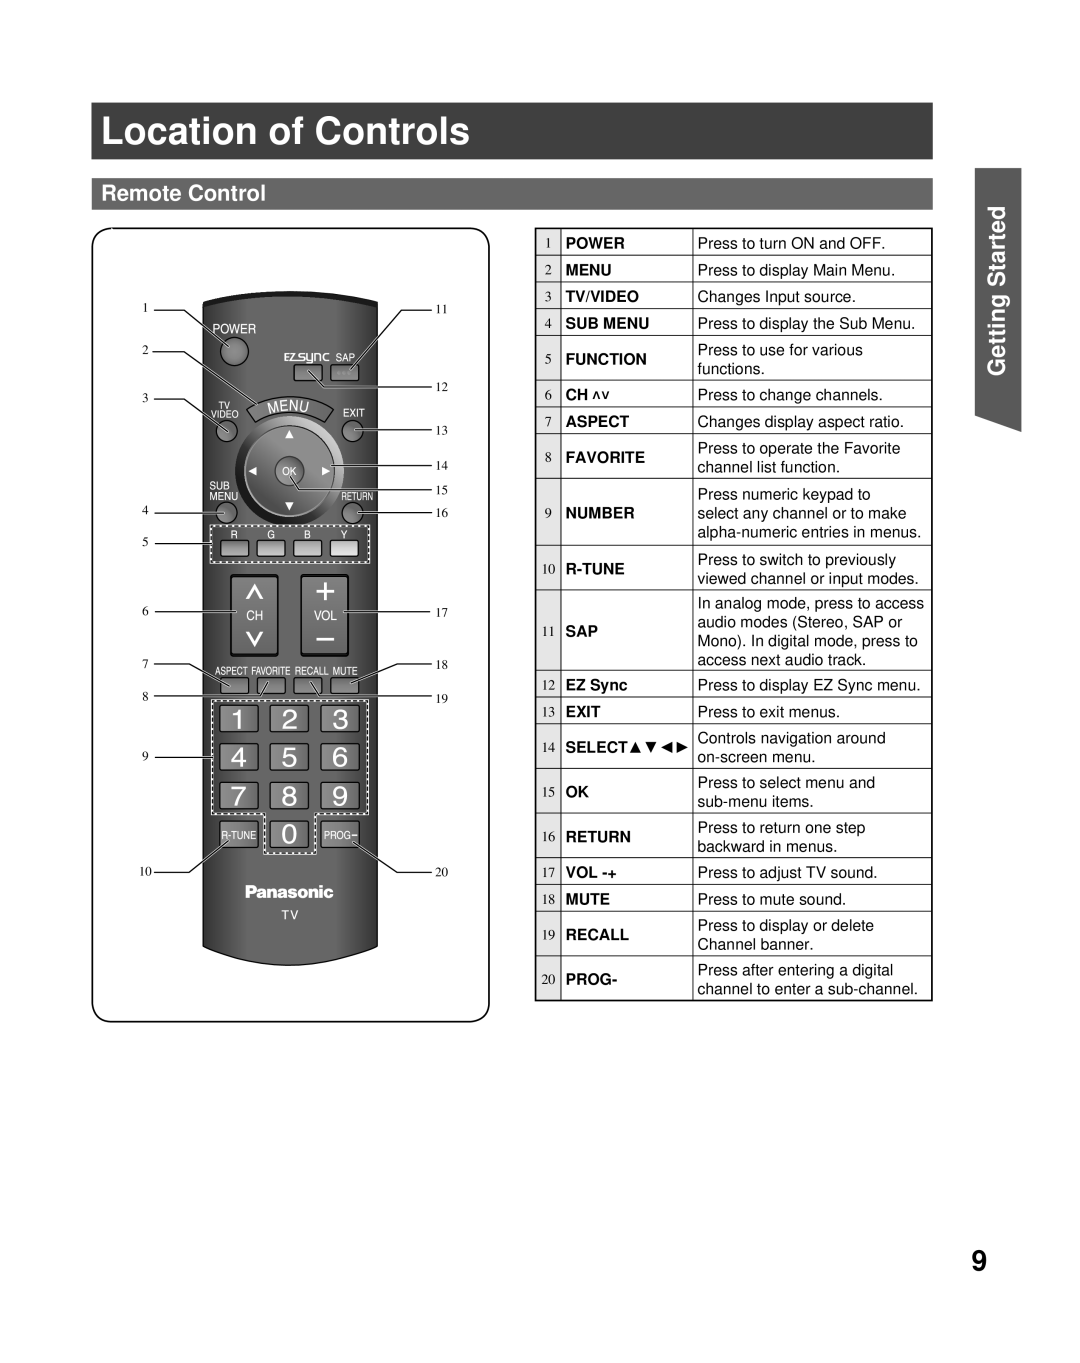 Panasonic PT-56LCX70-K, PT-61LCX70K, PT-50LCX7K manual Location of Controls, Remote Control, Getting Started 